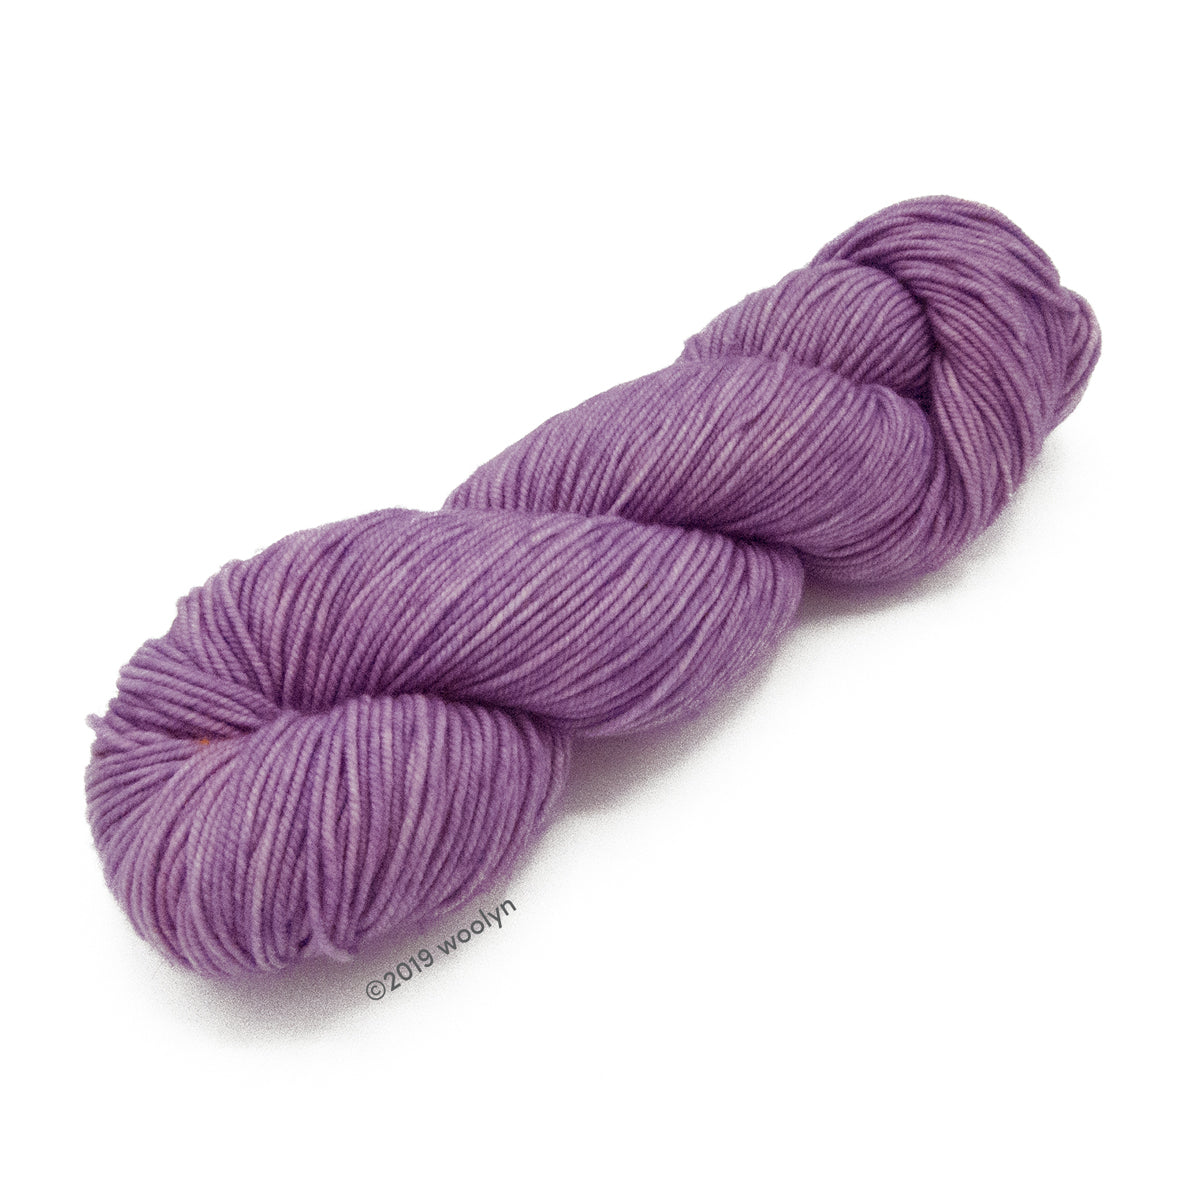 A skein of Knitted Wit Victory DK in Hydrangea a solid light purple color.